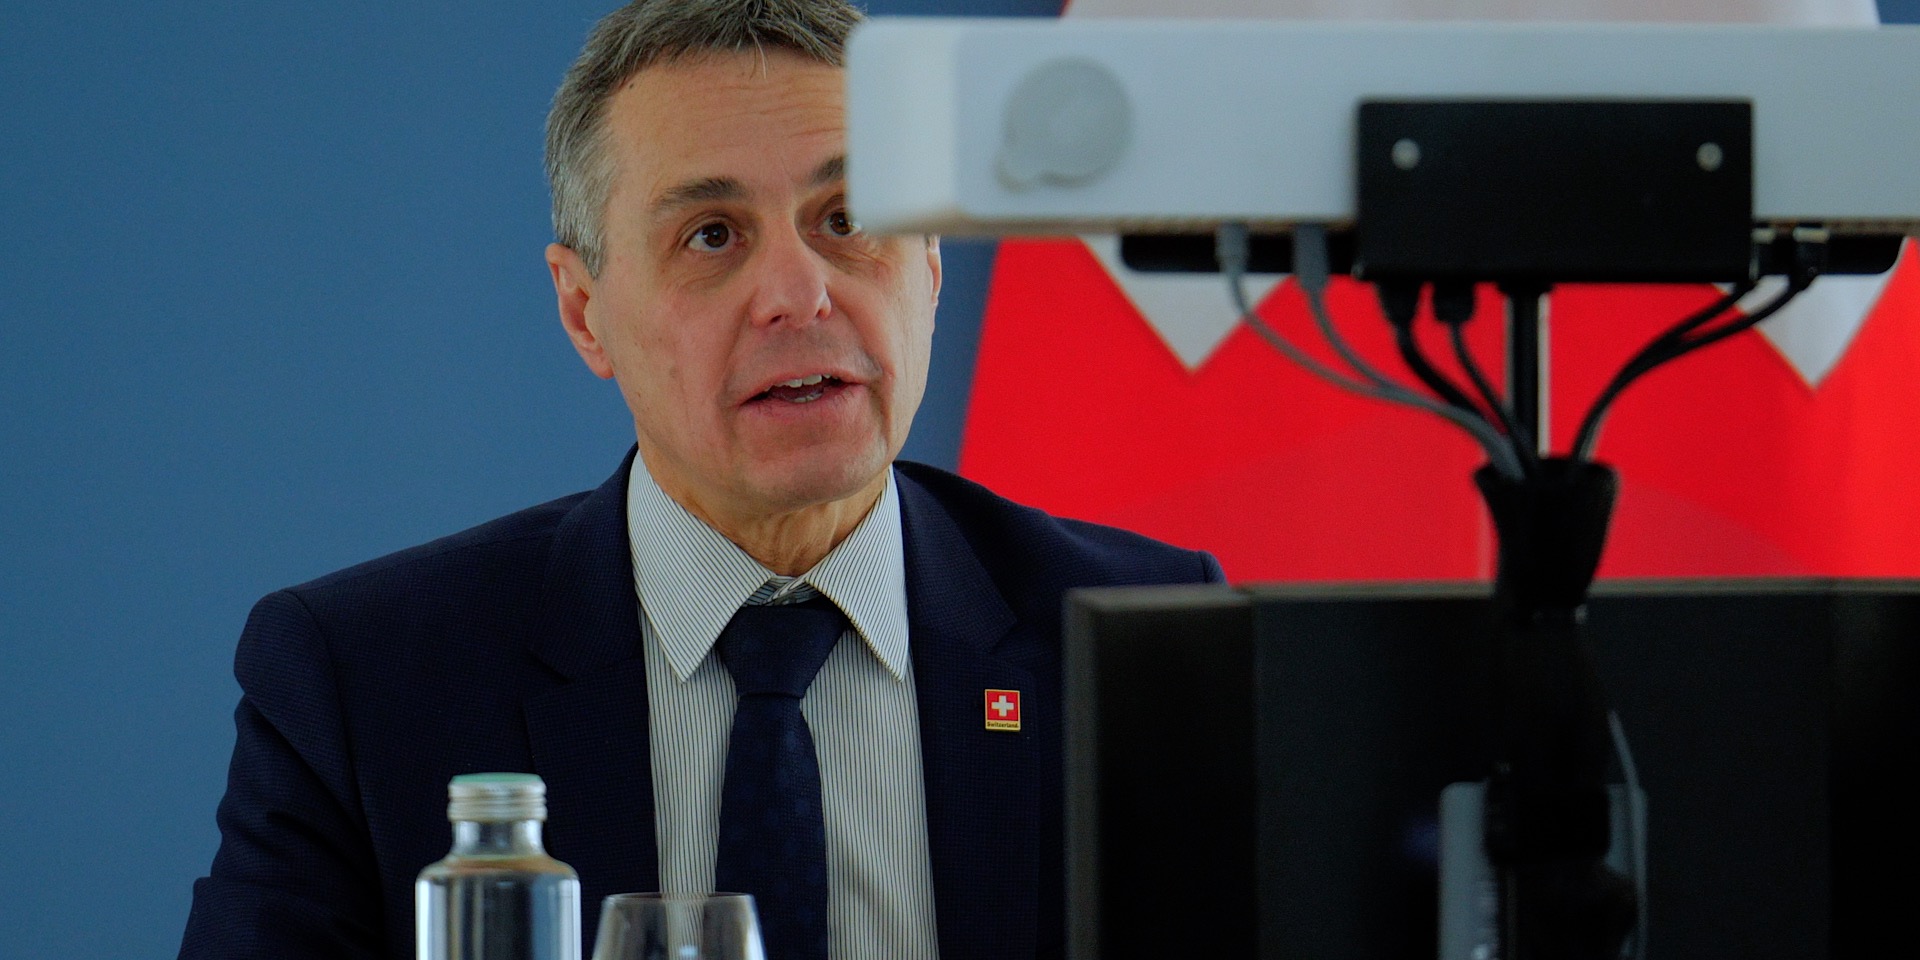 Federal Councillor Ignazio Cassis gives a speech in front of a camera during a virtual conference. Behind him, the Swiss flag.